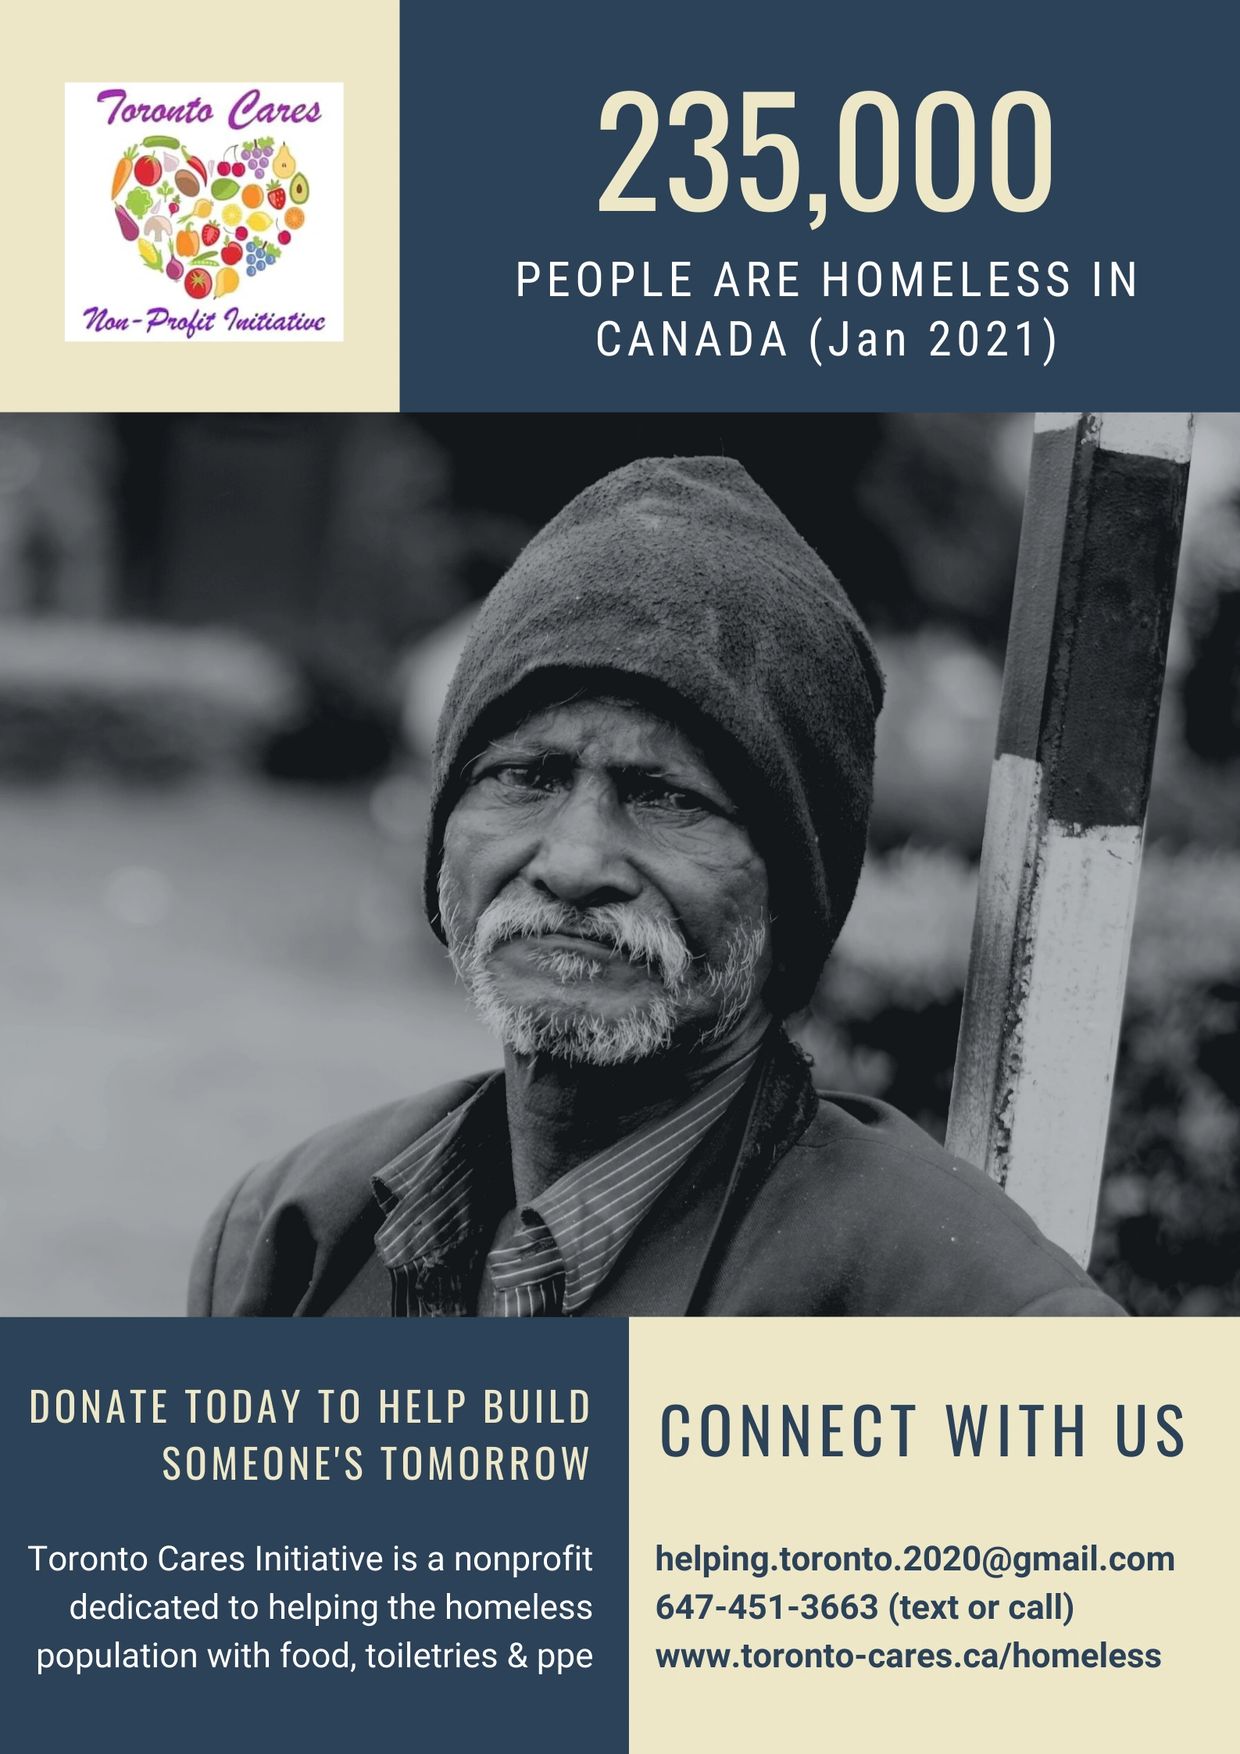 POSTER: 235,000 people are homeless in Canada (Jan 2021)
Donate today to help build someone’s tomorr